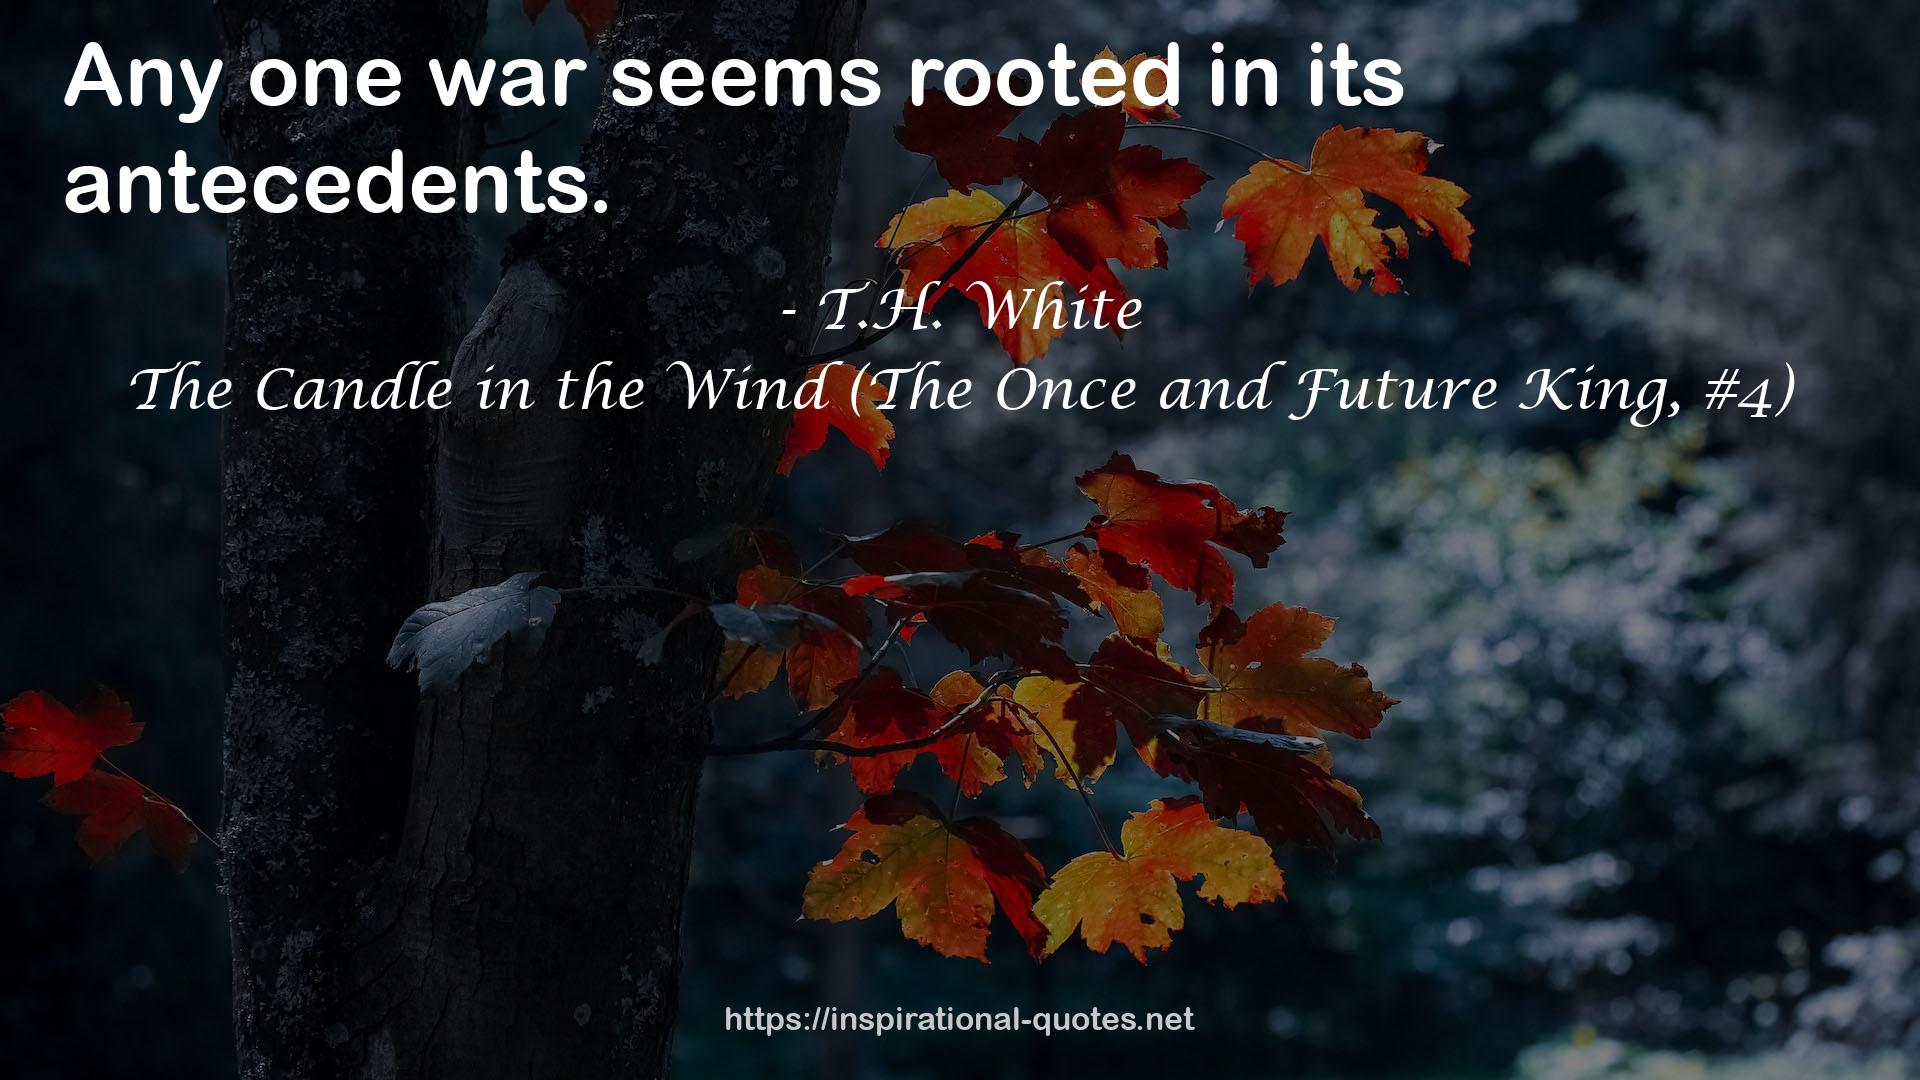 The Candle in the Wind (The Once and Future King, #4) QUOTES